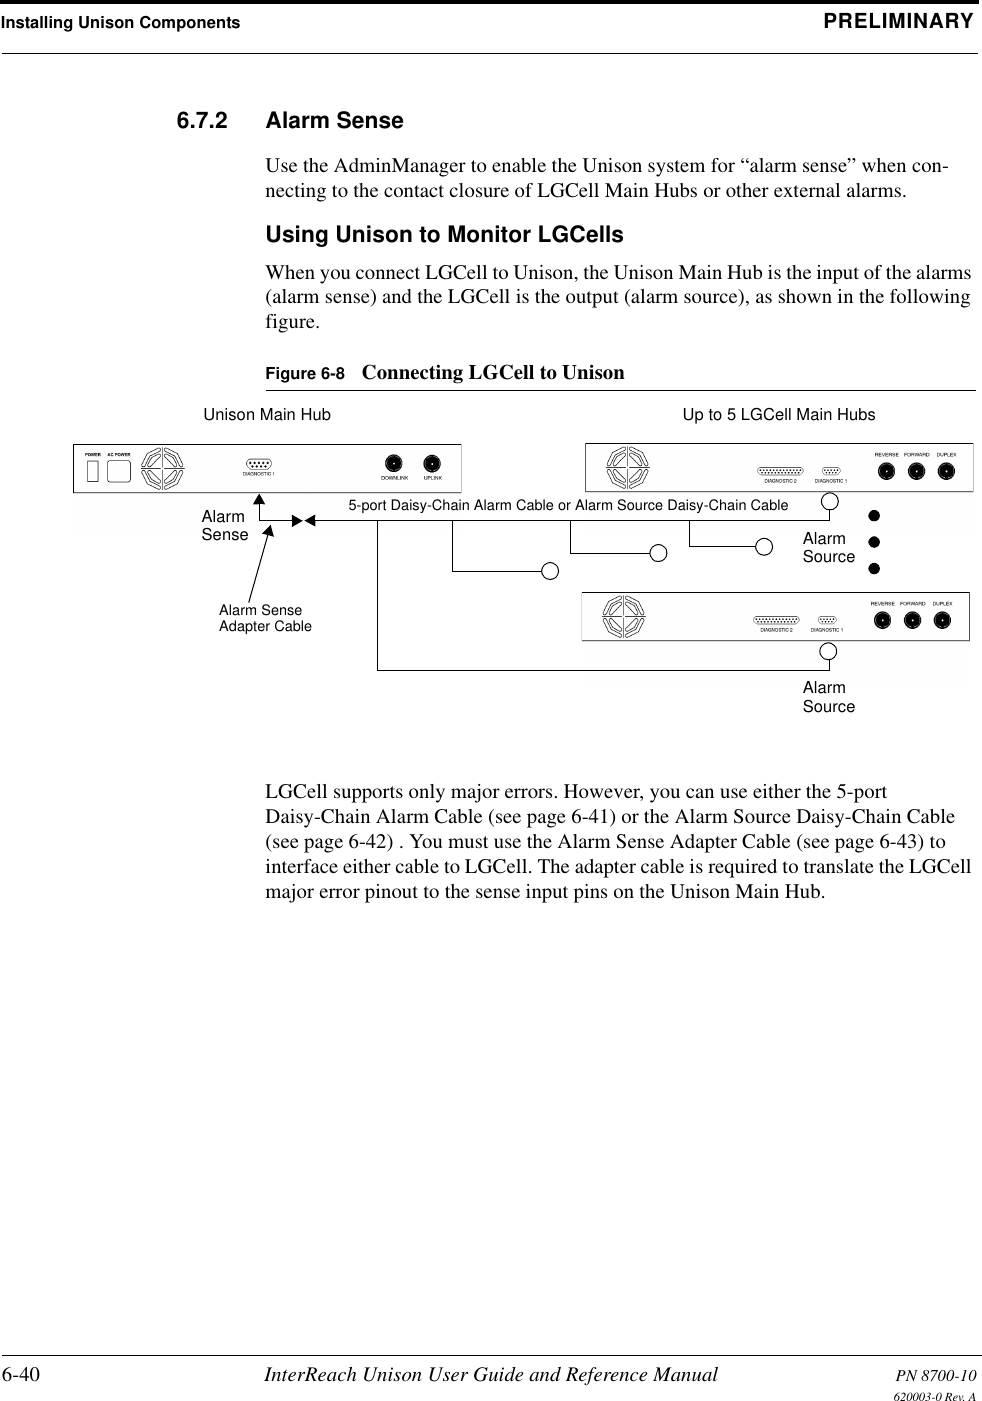 Installing Unison Components PRELIMINARY6-40 InterReach Unison User Guide and Reference Manual PN 8700-10620003-0 Rev. A6.7.2 Alarm SenseUse the AdminManager to enable the Unison system for “alarm sense” when con-necting to the contact closure of LGCell Main Hubs or other external alarms.Using Unison to Monitor LGCellsWhen you connect LGCell to Unison, the Unison Main Hub is the input of the alarms (alarm sense) and the LGCell is the output (alarm source), as shown in the following figure.Figure 6-8 Connecting LGCell to UnisonLGCell supports only major errors. However, you can use either the 5-port Daisy-Chain Alarm Cable (see page 6-41) or the Alarm Source Daisy-Chain Cable (see page 6-42) . You must use the Alarm Sense Adapter Cable (see page 6-43) to interface either cable to LGCell. The adapter cable is required to translate the LGCell major error pinout to the sense input pins on the Unison Main Hub.Up to 5 LGCell Main HubsUnison Main HubAlarmSense AlarmSourceAlarmSourceAlarm SenseAdapter Cable5-port Daisy-Chain Alarm Cable or Alarm Source Daisy-Chain Cable